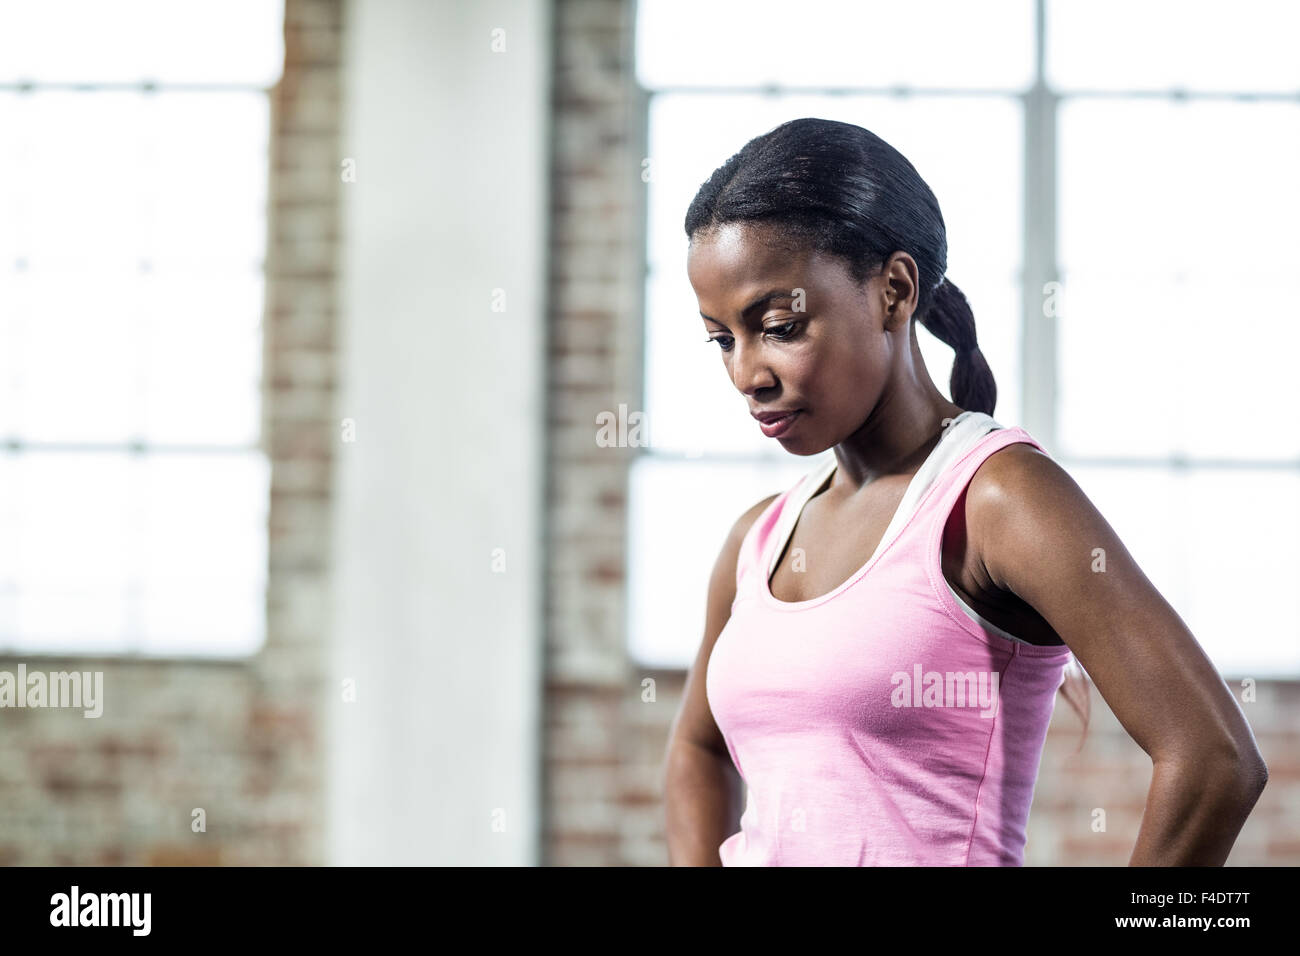 Serious muscular woman focused on herself Stock Photo